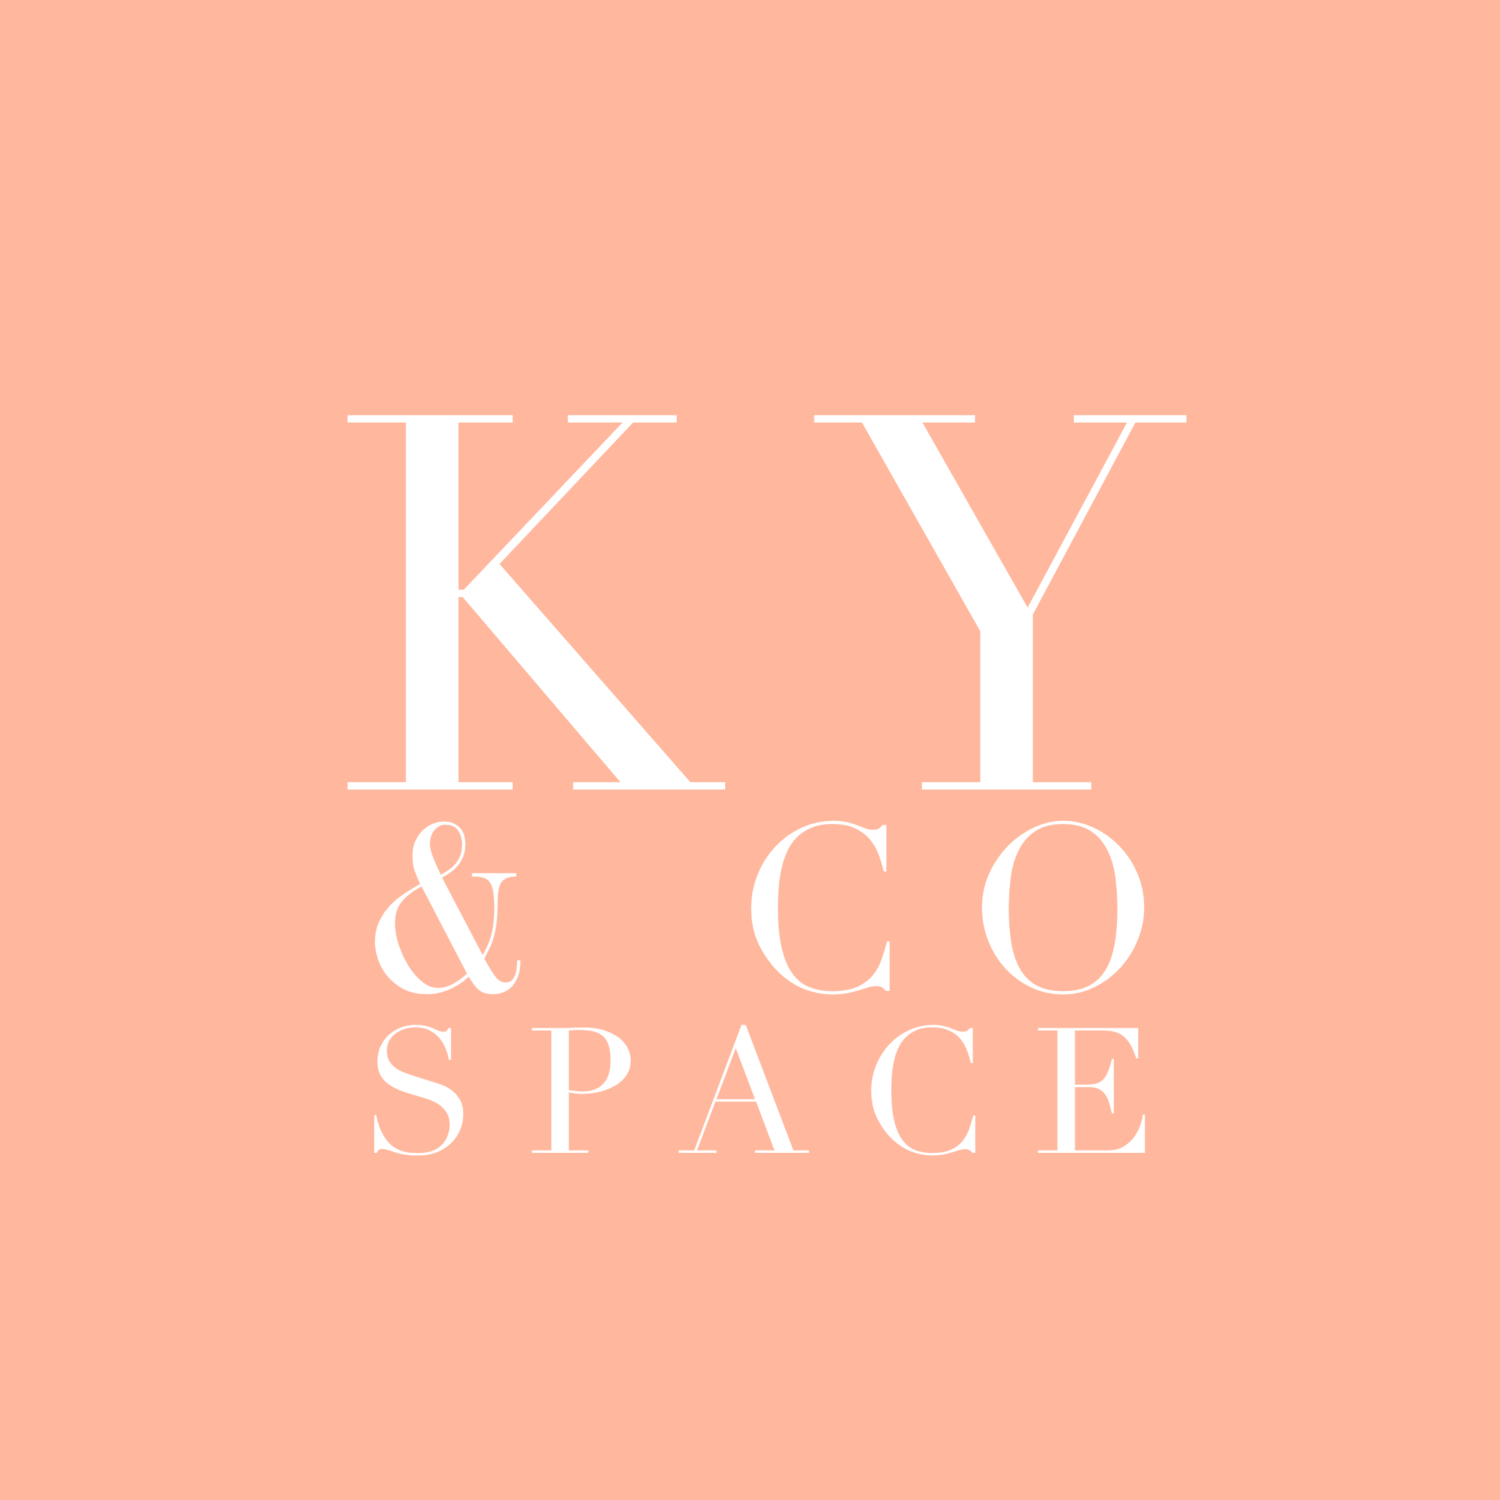 The KY &amp; CO Space